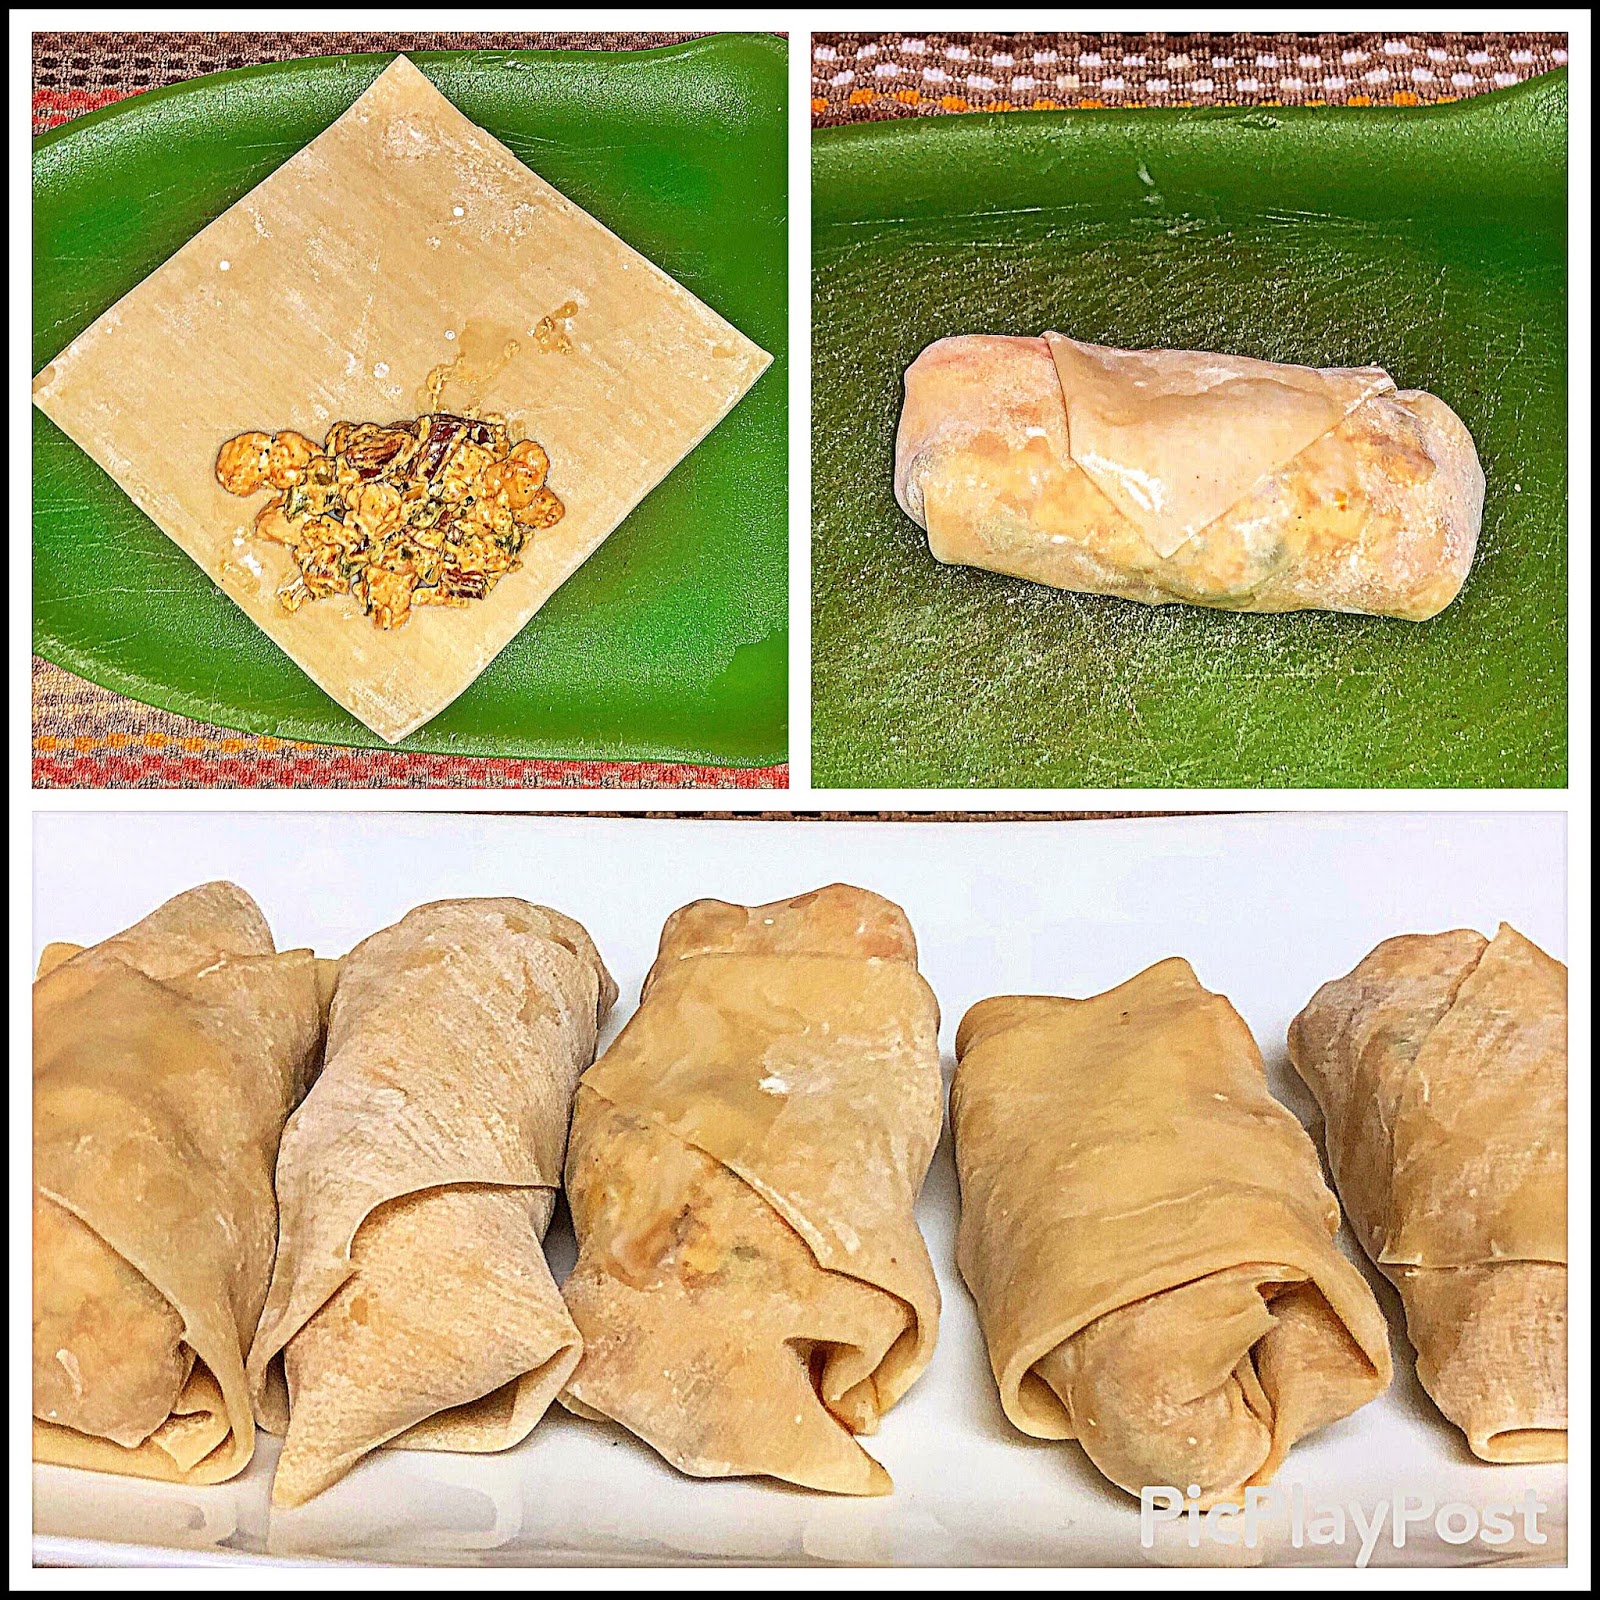 The Weekend Gourmet: Twin Dragon Asian Wrapper Blogger Recipe  ChallengeFeaturing Big Easy Egg Rolls with Creamy Creole Dipping Sauce  #TwinDragon #ChefYaki #twindragonwrappers #wontons #eggrolls #potstickers  #TooktheChallenge